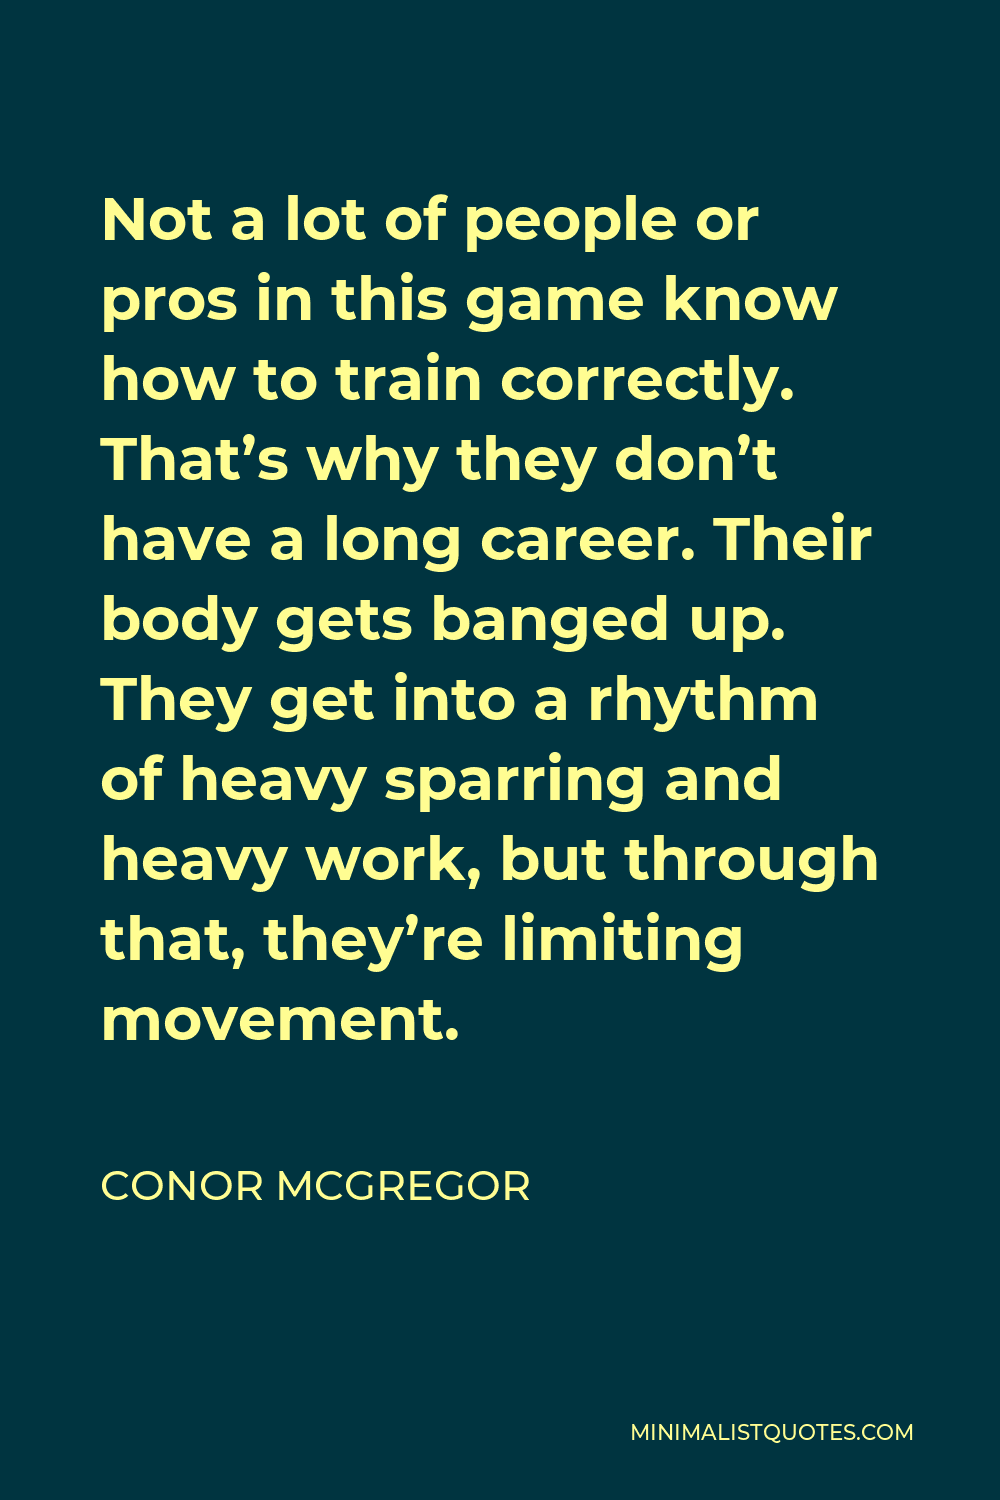 Conor McGregor Quote - Not a lot of people or pros in this game know how to train correctly. That’s why they don’t have a long career. Their body gets banged up. They get into a rhythm of heavy sparring and heavy work, but through that, they’re limiting movement.